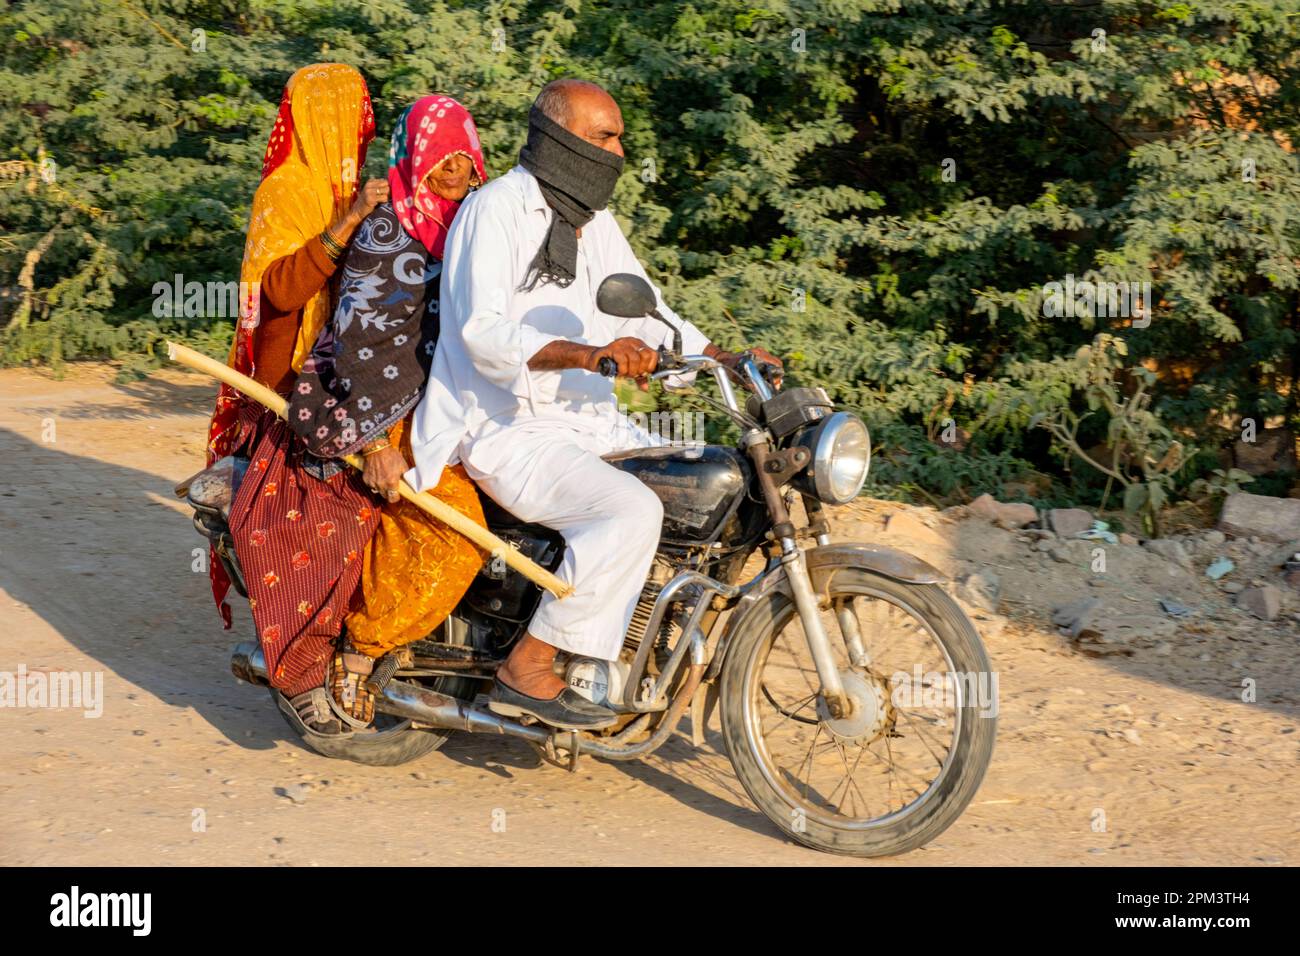 India, Rajasthan state, Rohet, family on a motorbike Stock Photo